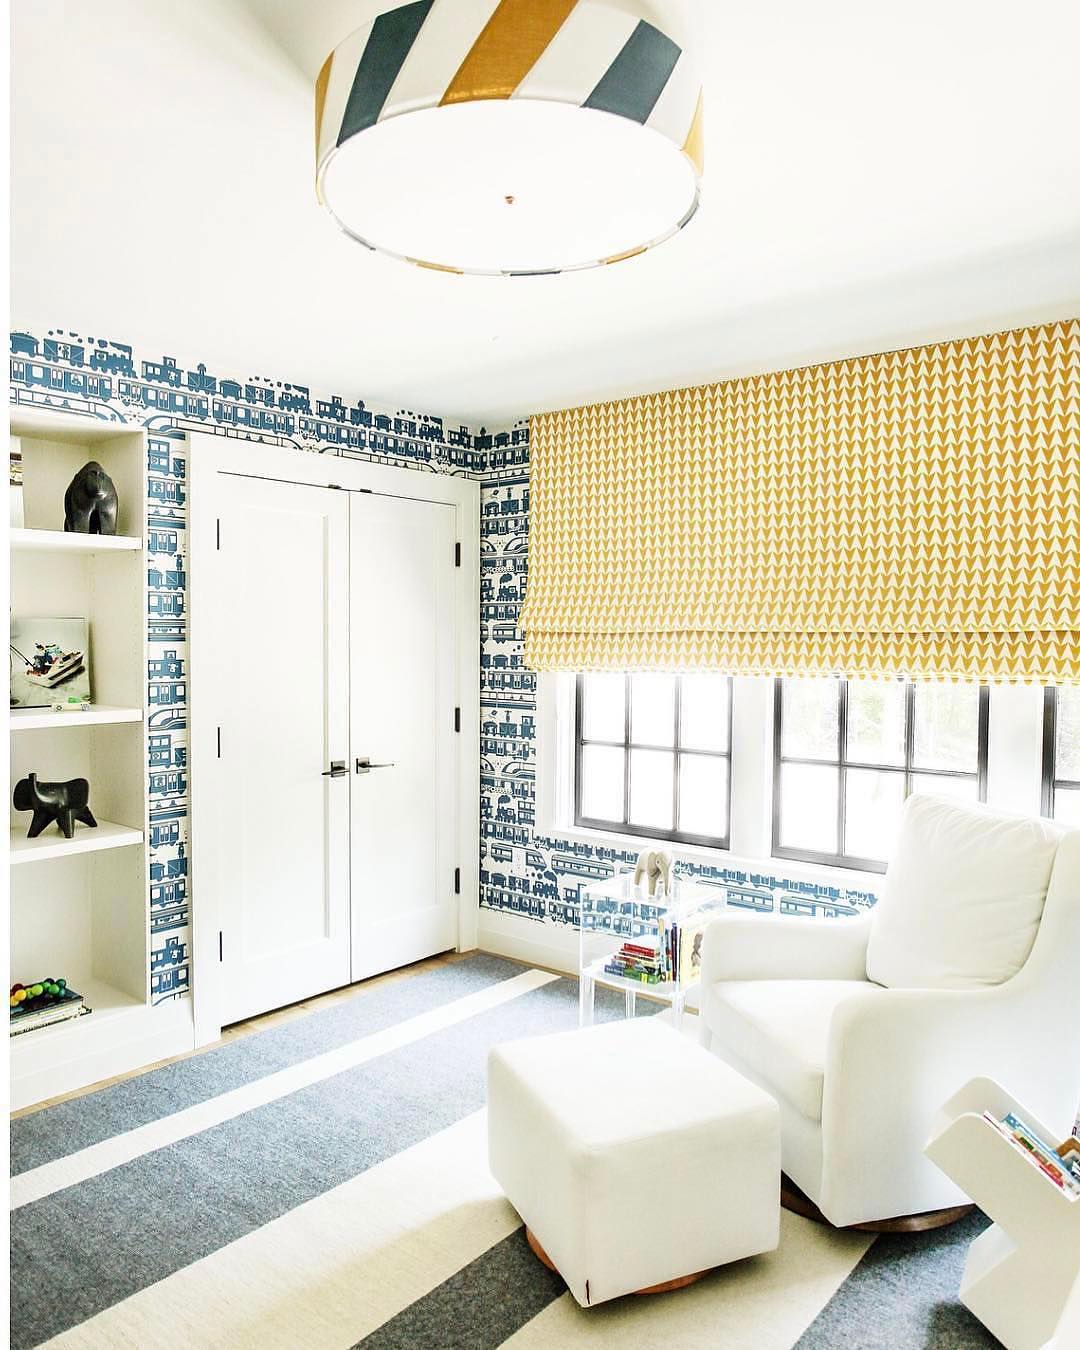 Living room with blue striped floors and blue patterned walls. Photo by Instagram user @carawoodhouseinteriors